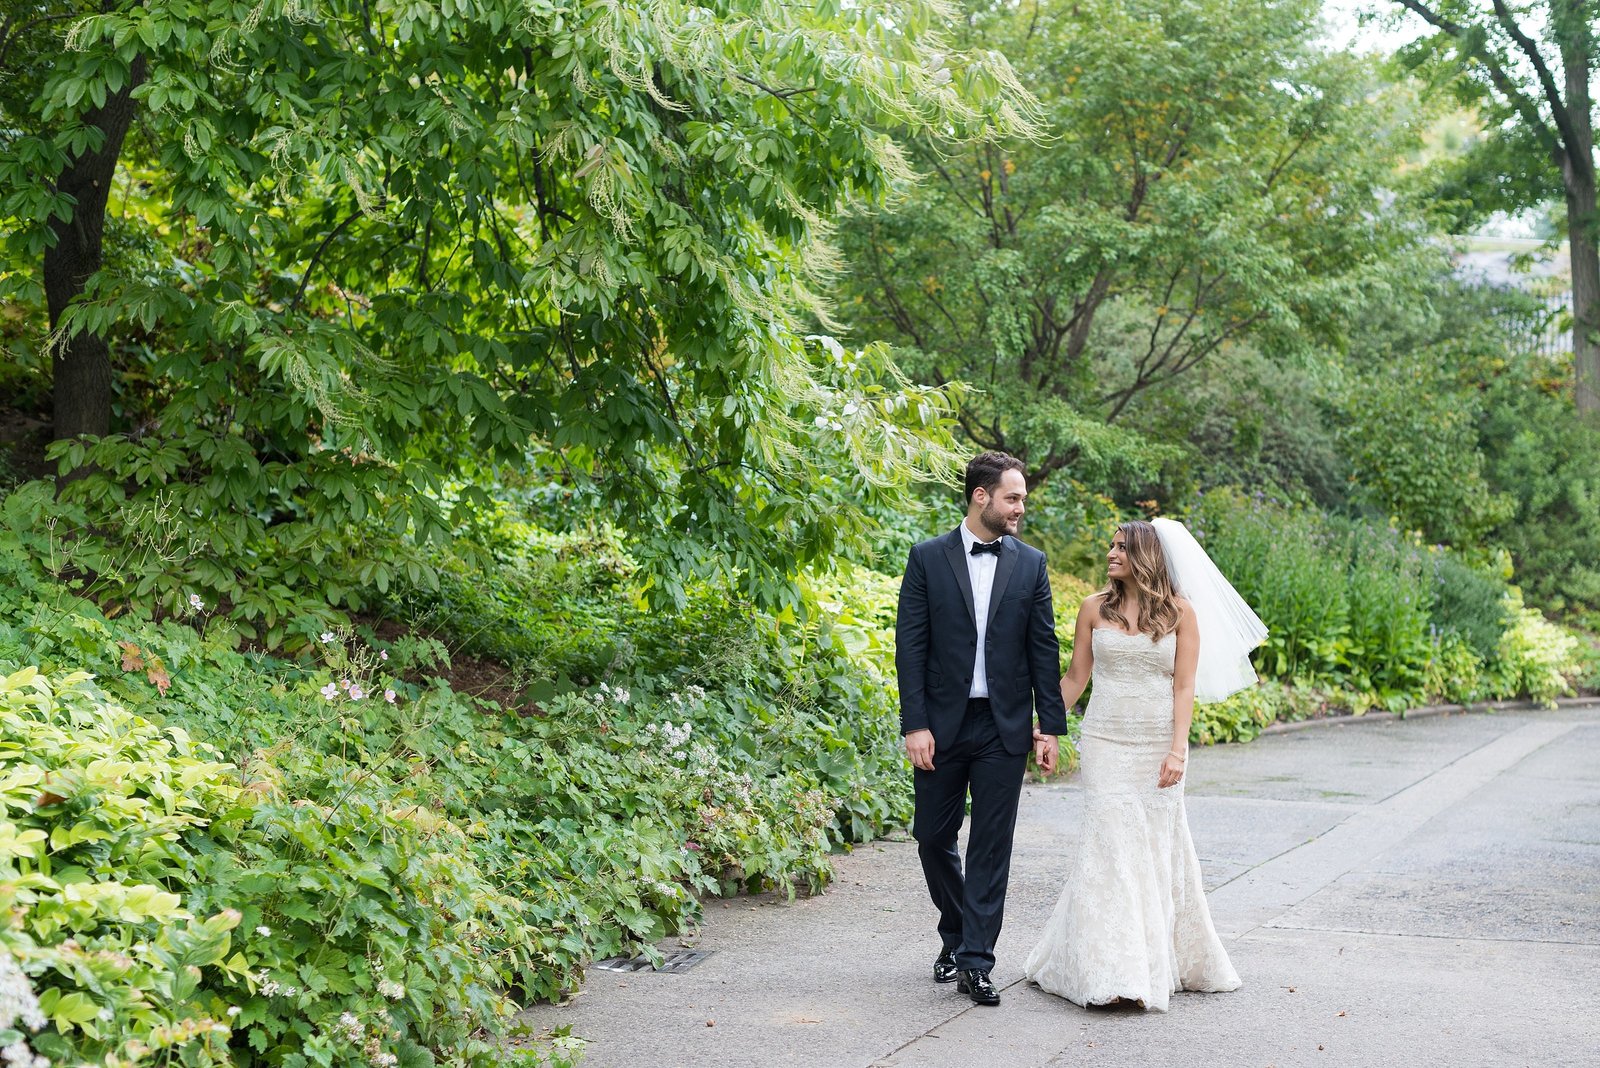 Bride and Groom looking at each other and walking at the Conservatory Garden in Central Park, New York City Photo